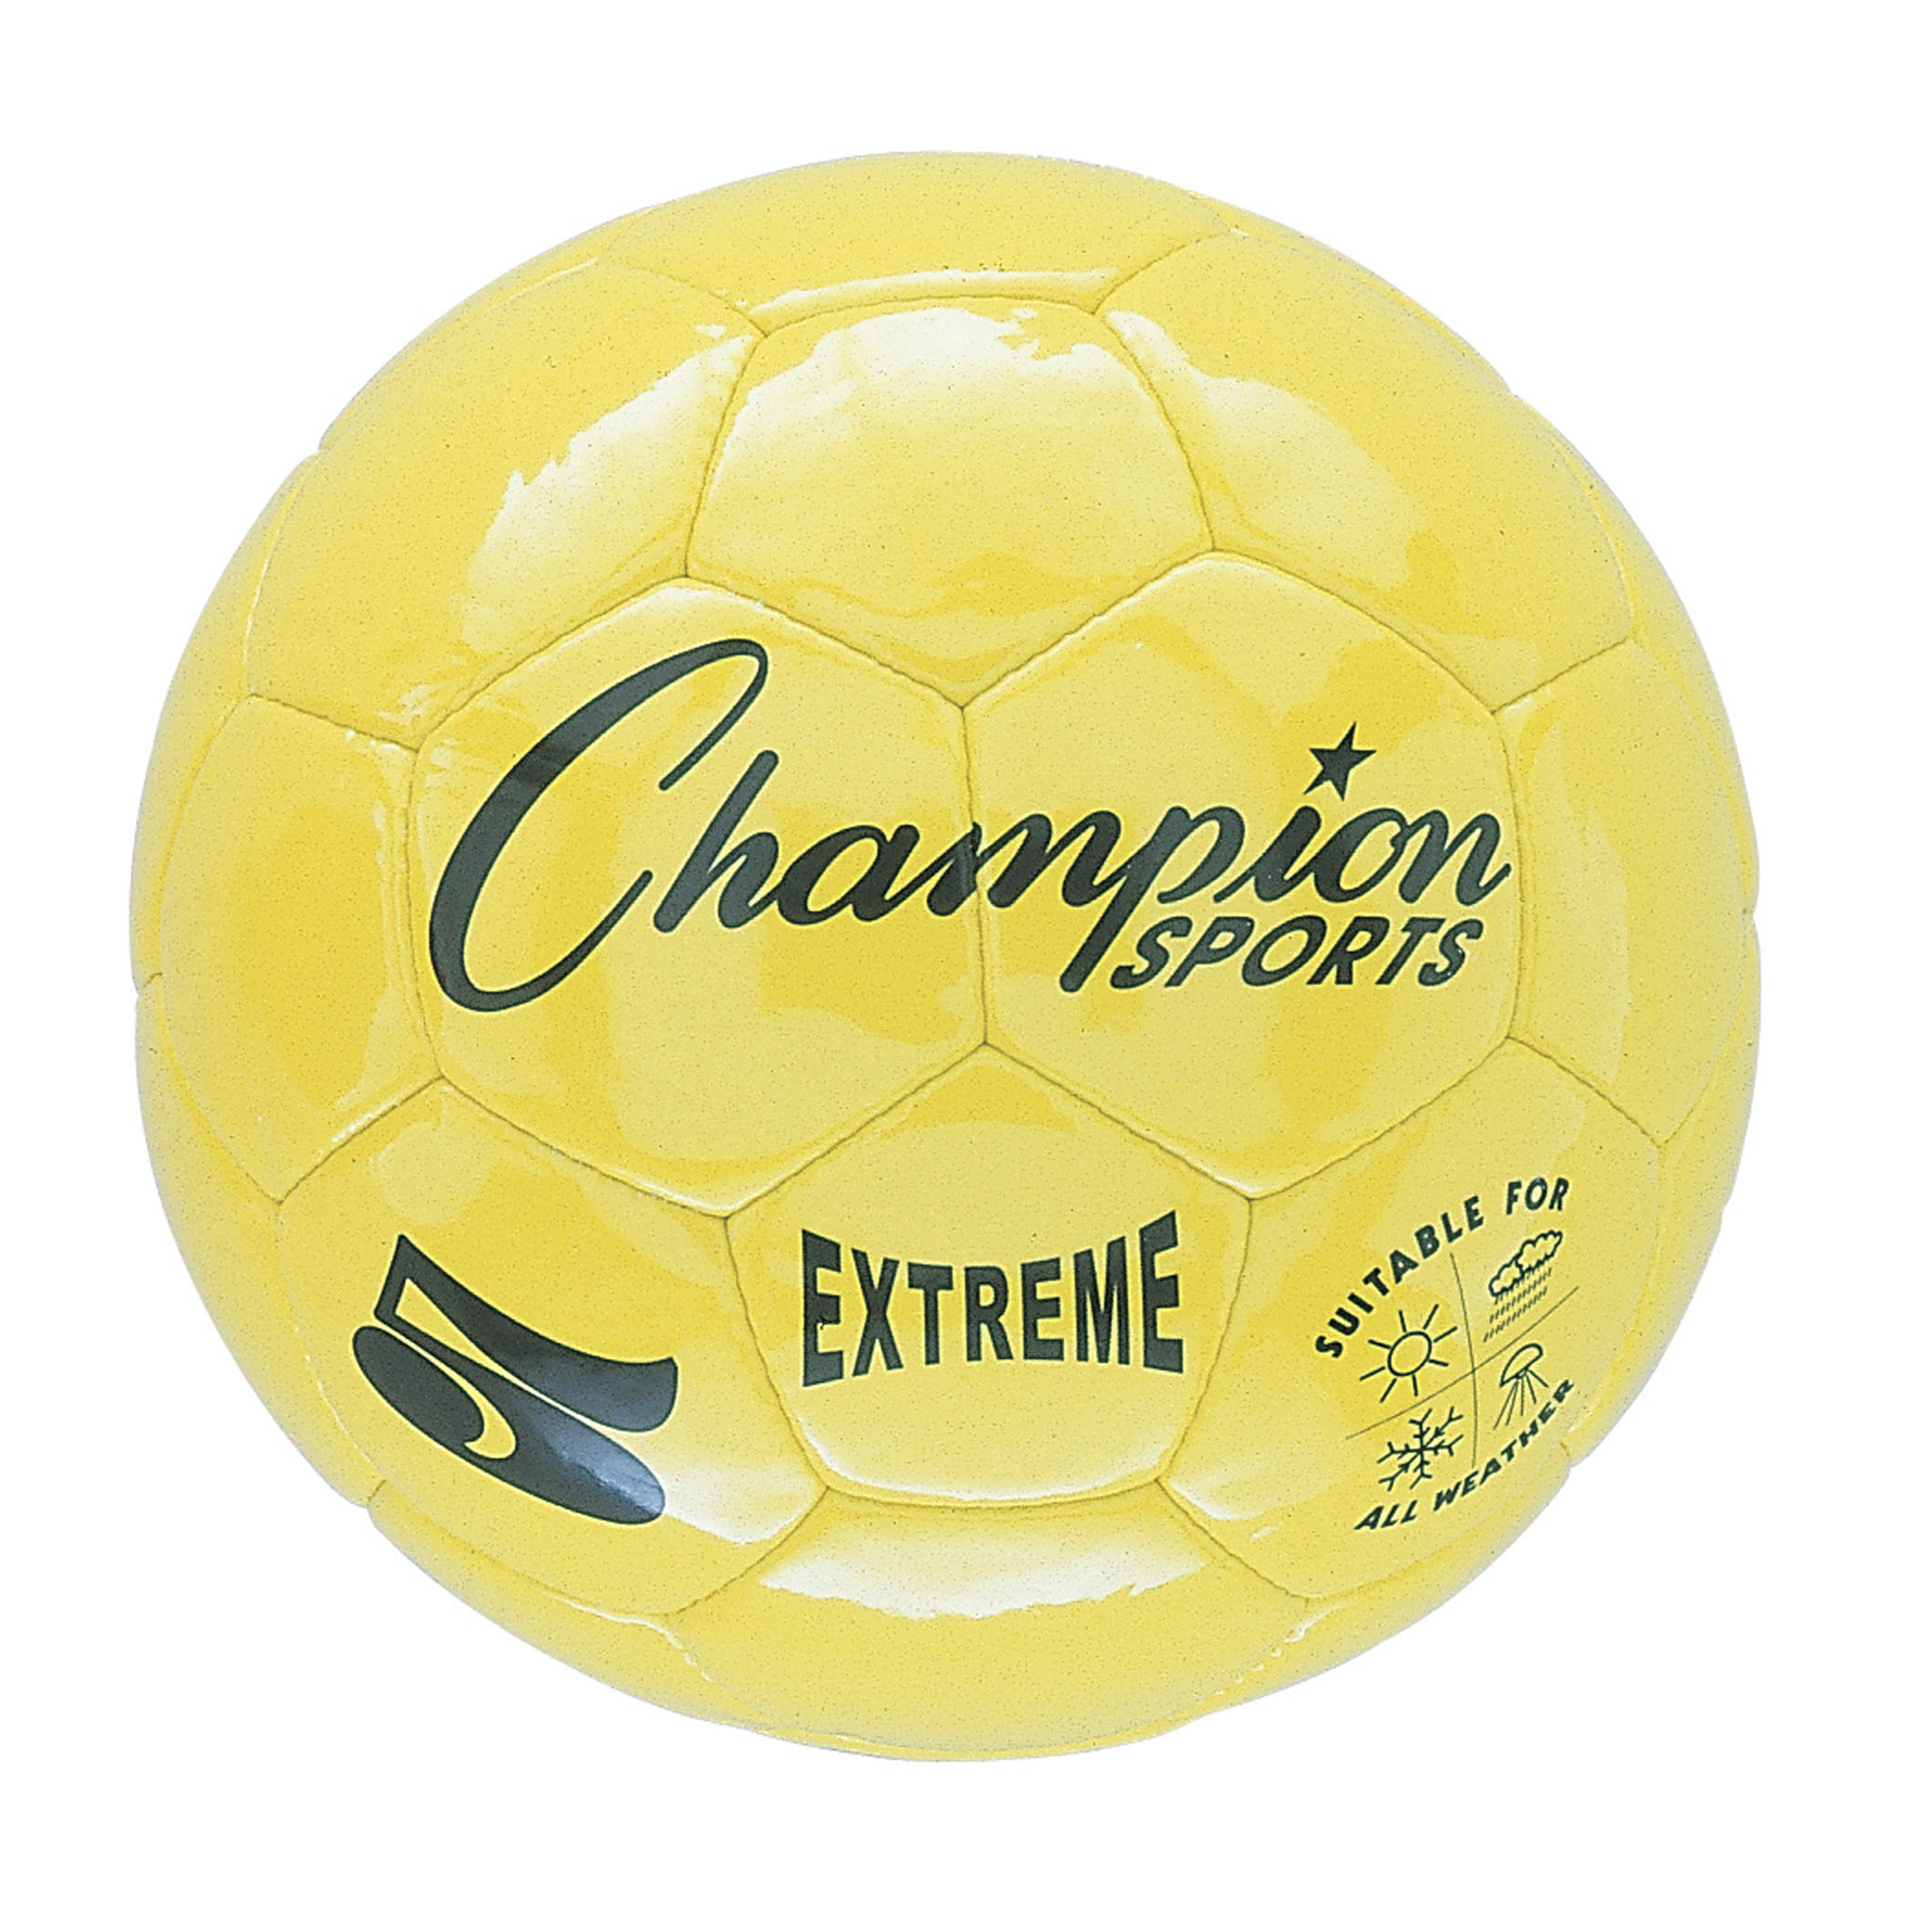 Extreme Soccer Ball, Size 5, Yellow